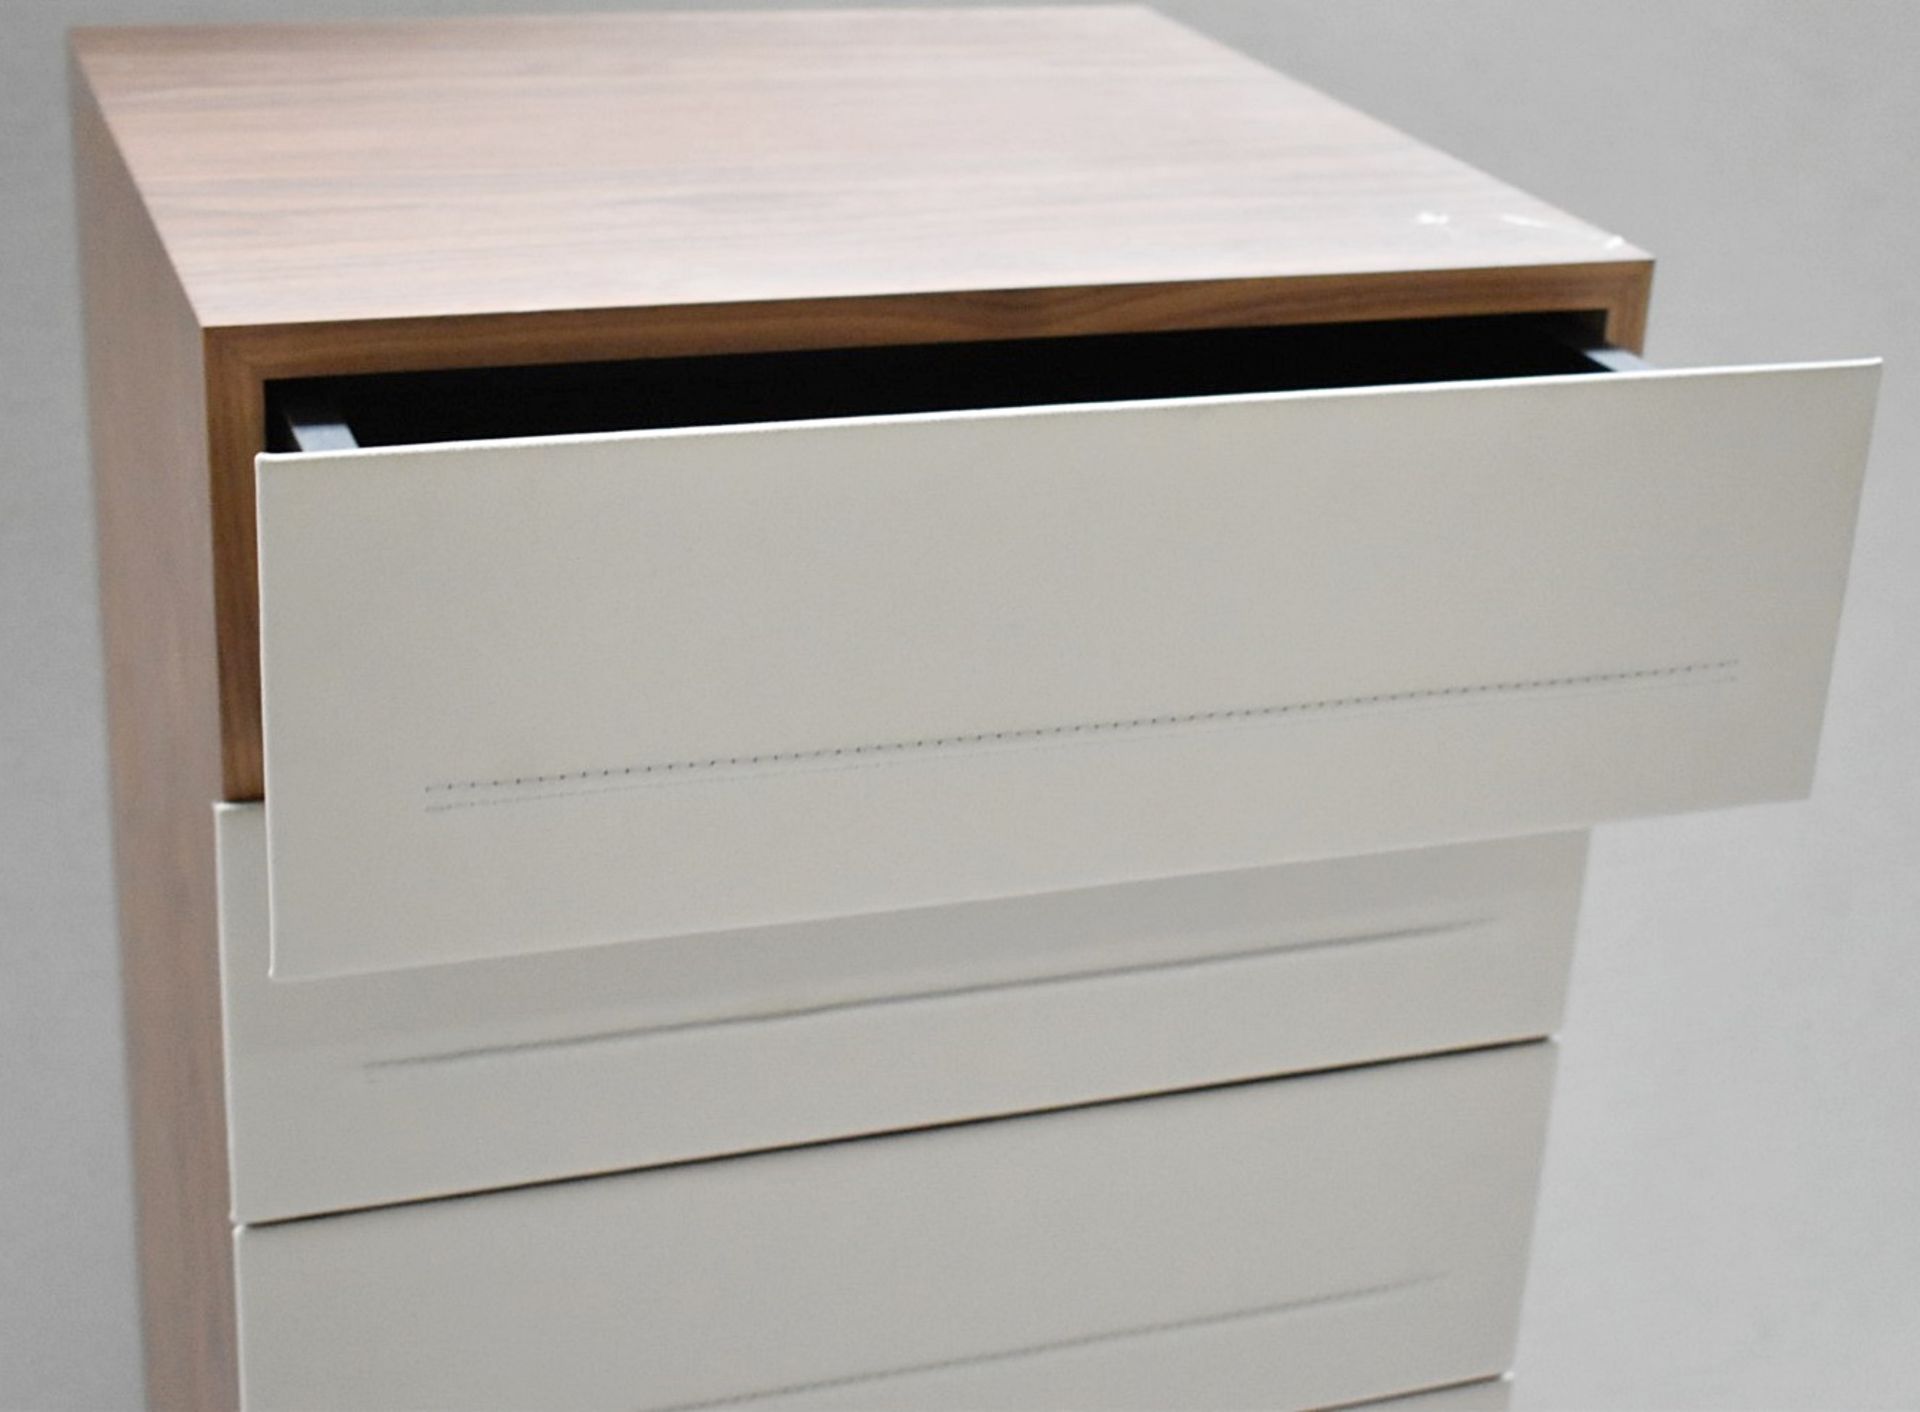 1 x CATTELAN ITALIA Dyno Luxury Italian Leather Fronted 7-Drawer Tall Chest - Original Price £4,000 - Image 3 of 7